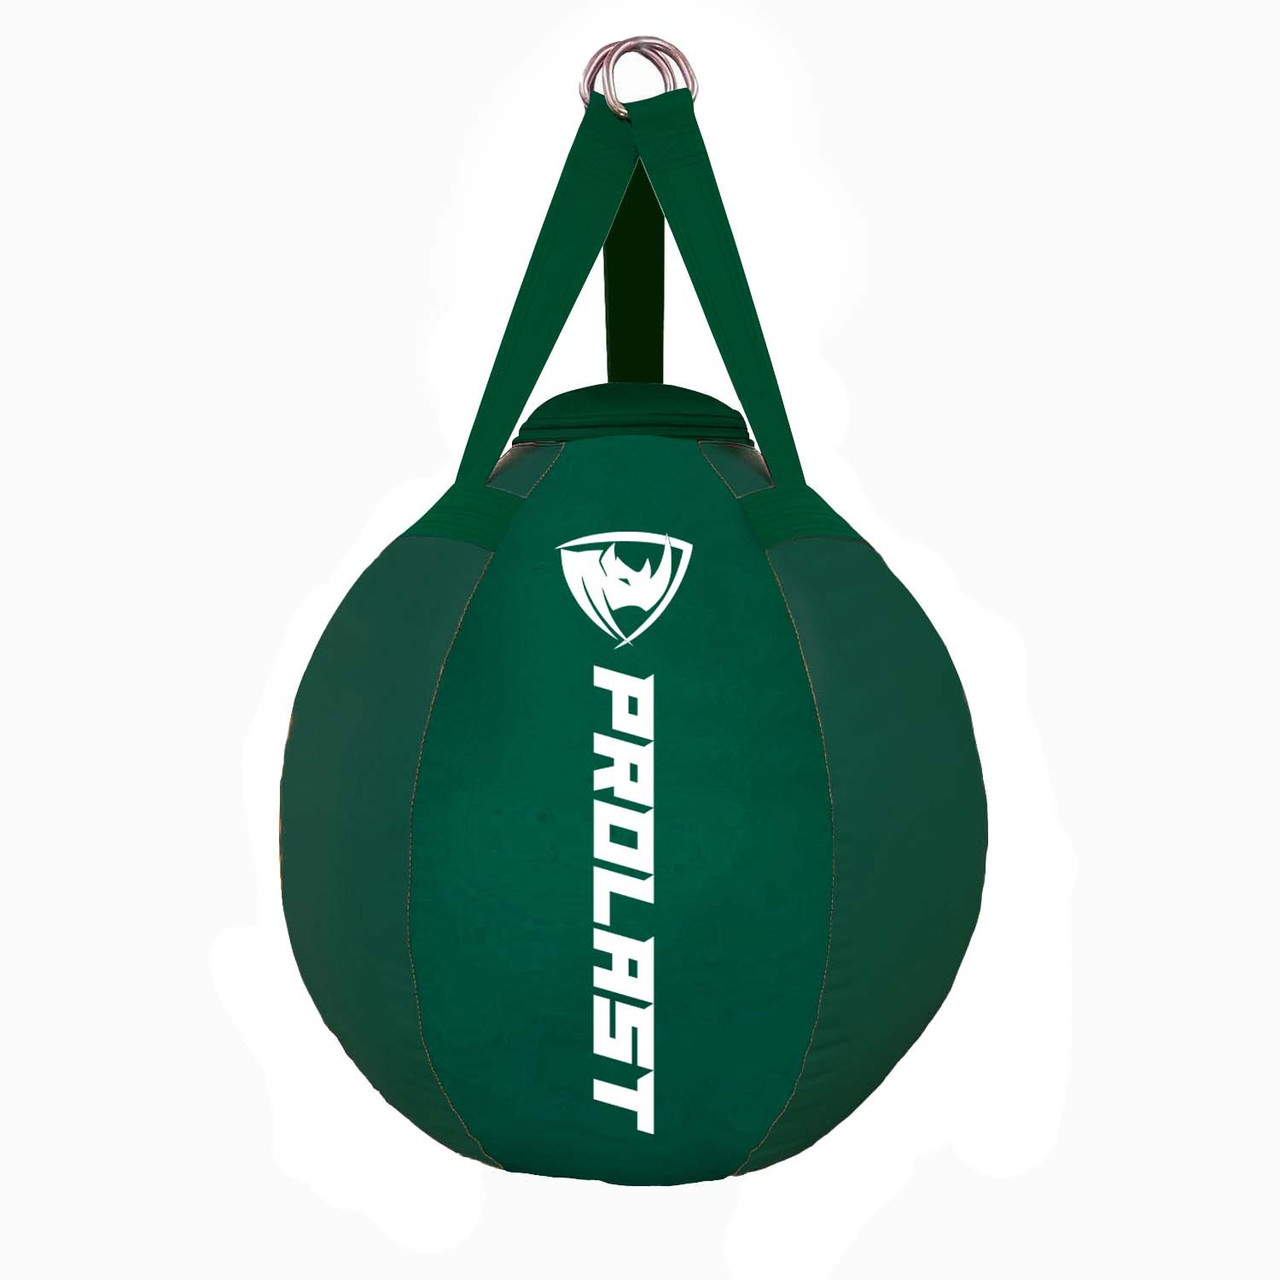 70lb Wrecking Ball Round Heavy Bag Green Made in USA